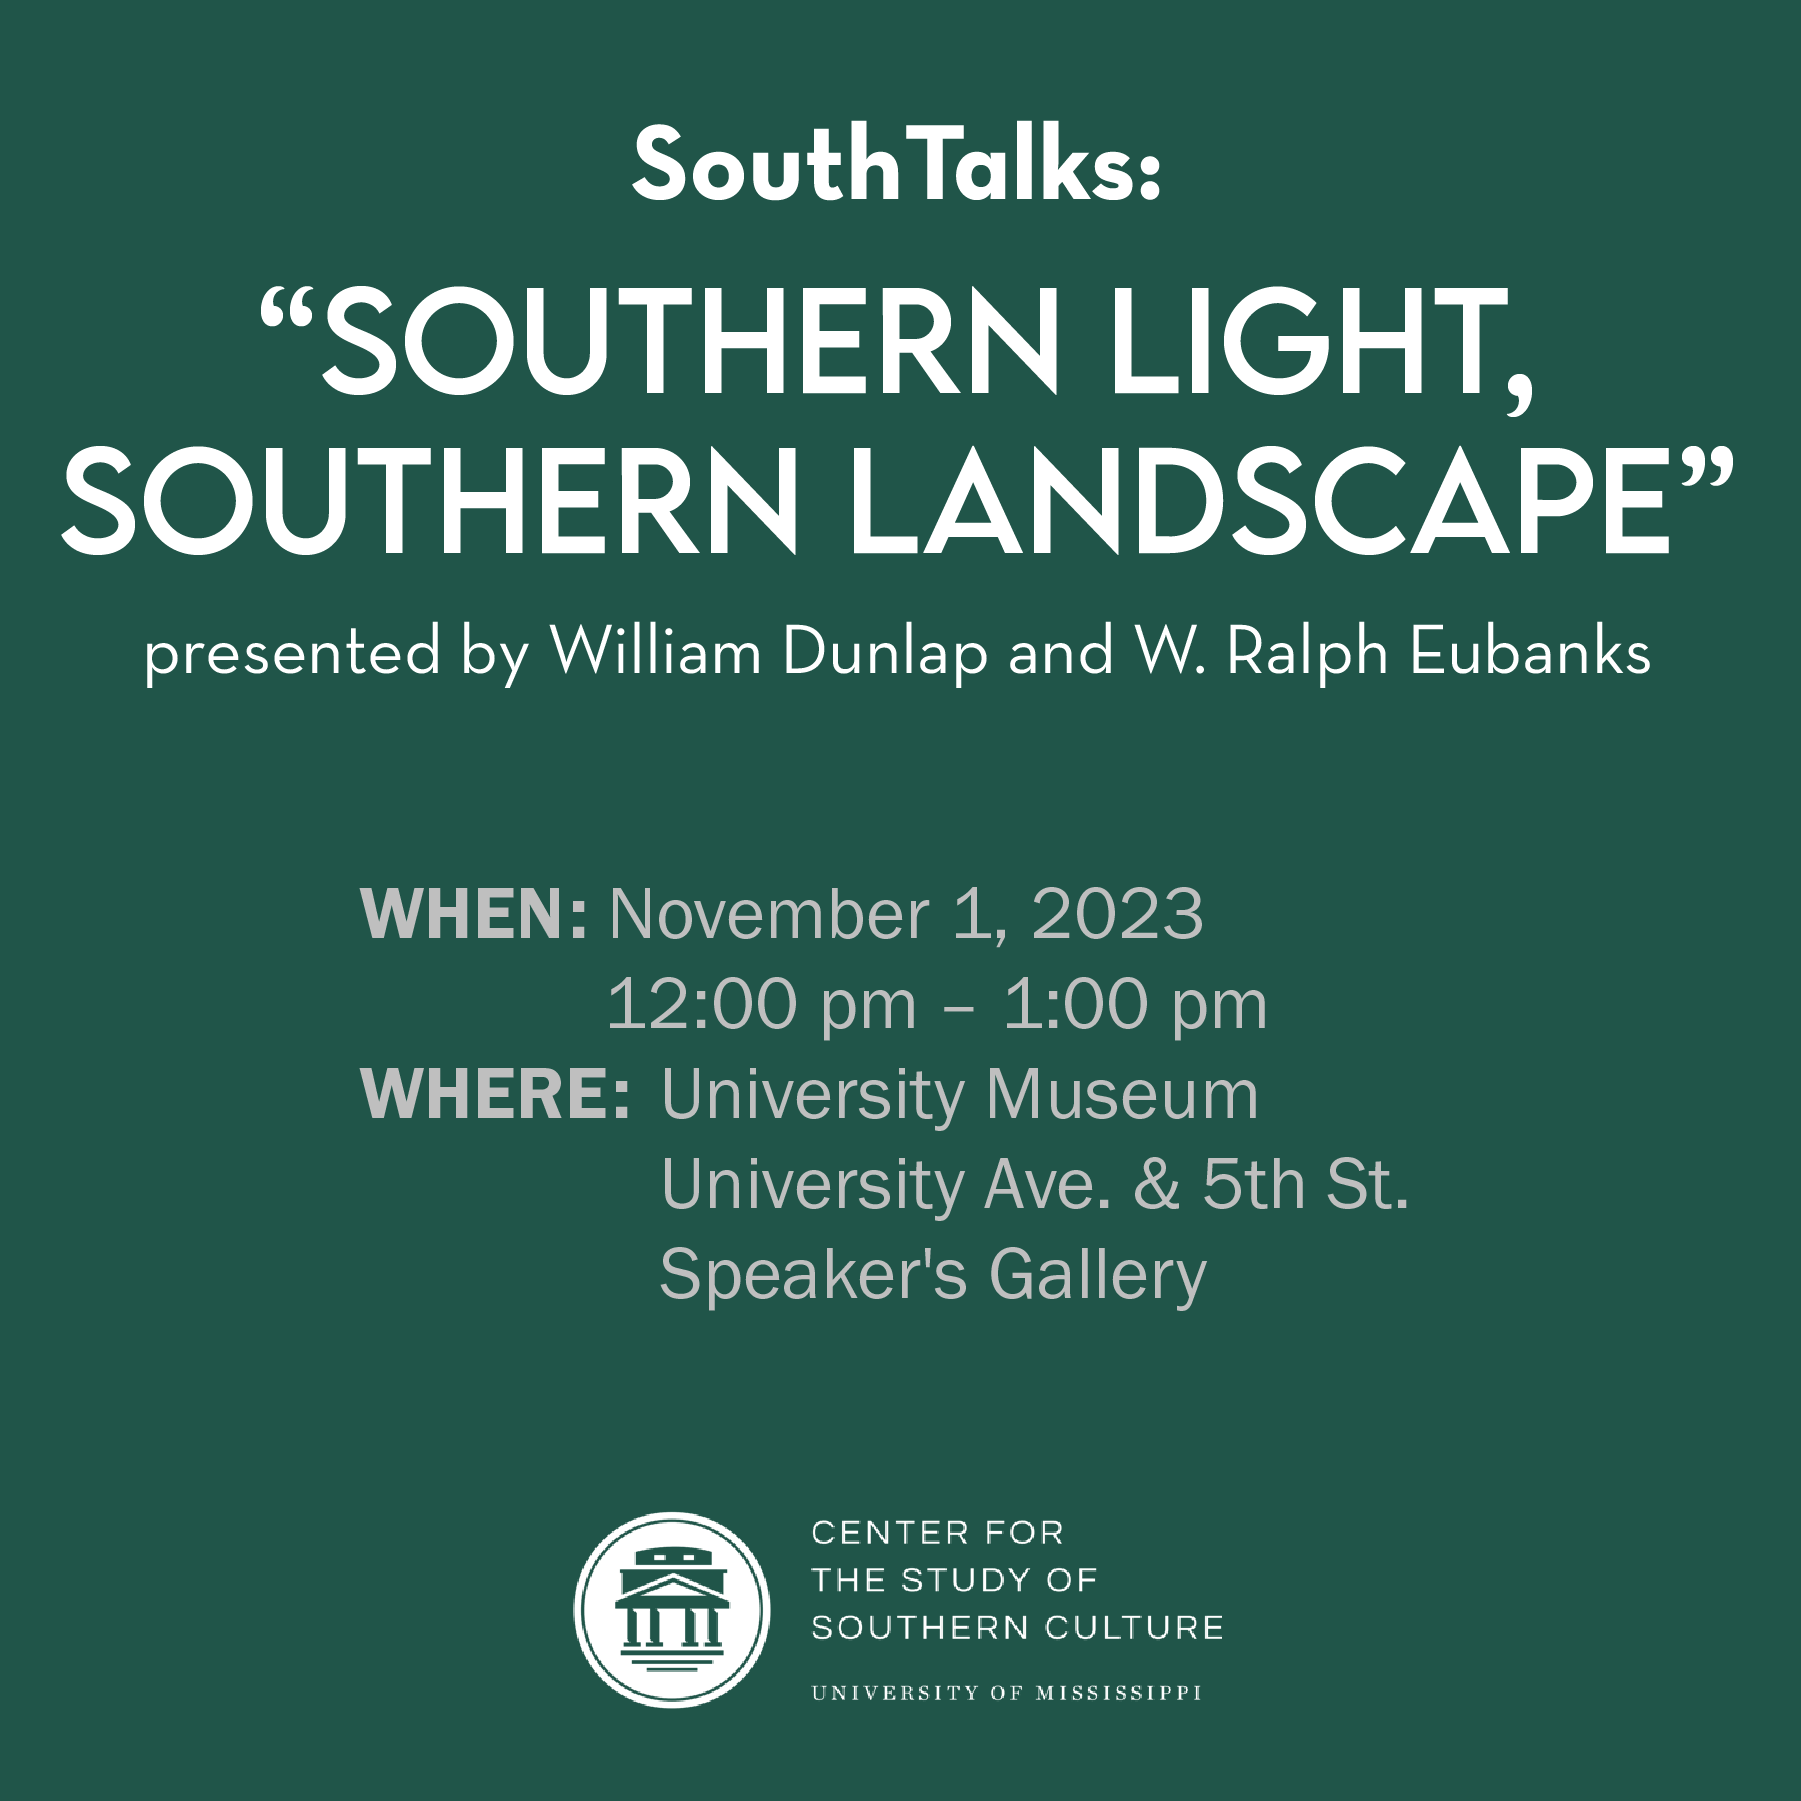 SouthTalks presented by William Dunlap and W. Ralph Eubanks November 1st 12pm-1pm at the University Museum